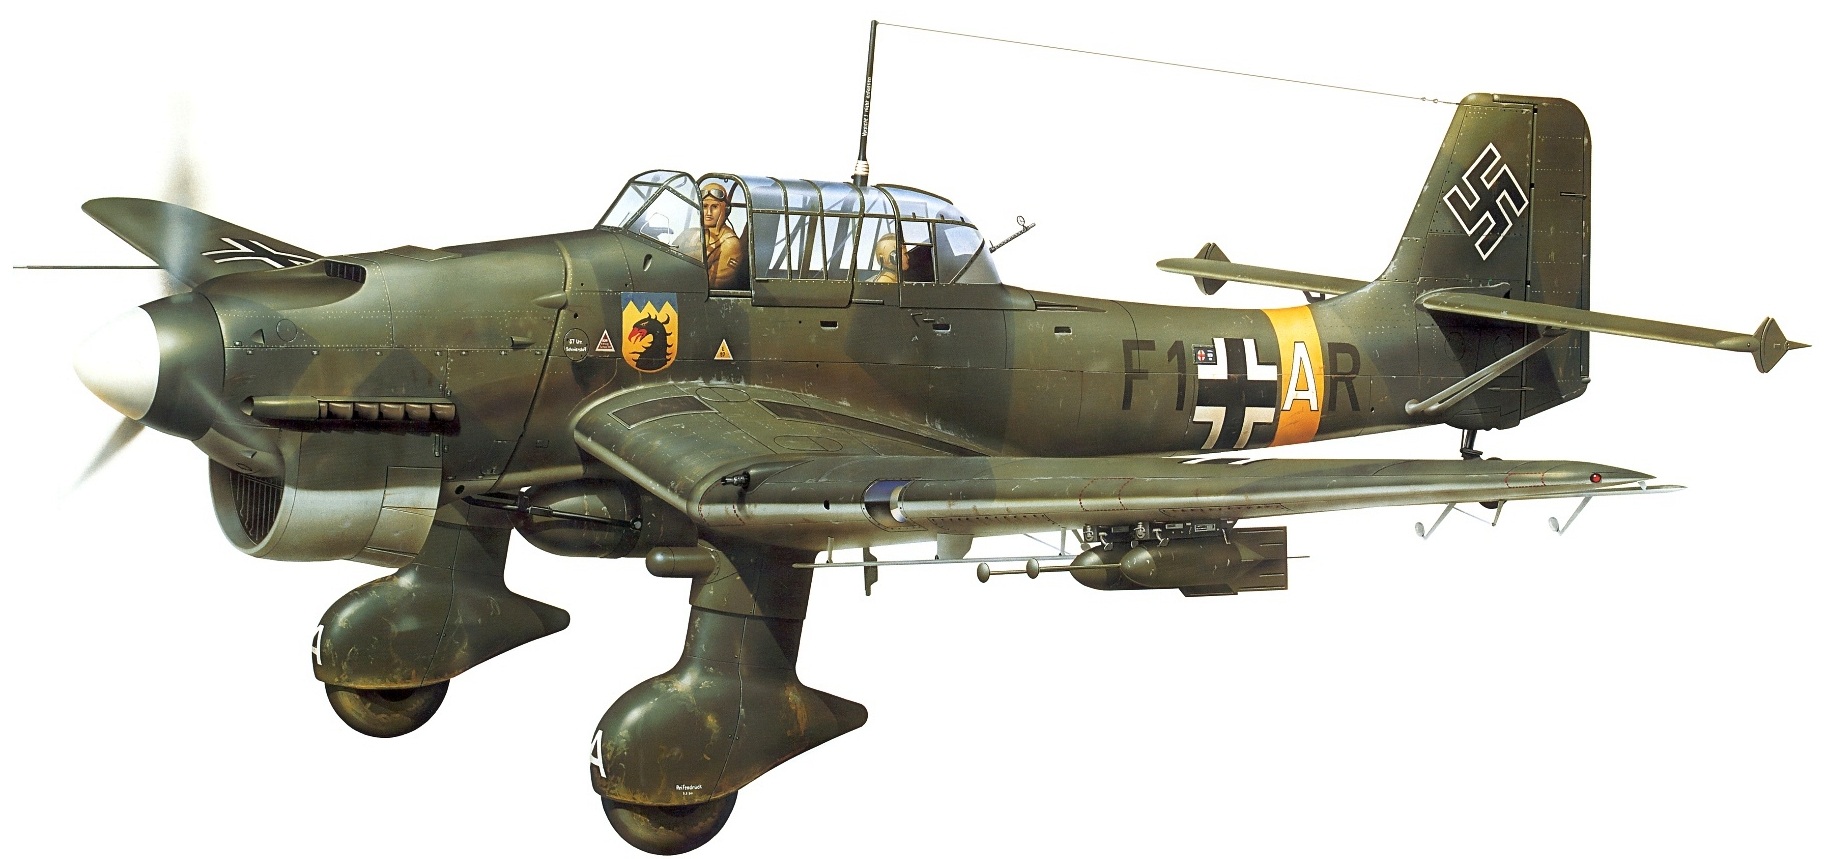 General 1826x859 World War II military military aircraft aircraft airplane Boxart Junkers Ju-87 Stuka Dive bomber Bomber Luftwaffe Germany white background Junkers German aircraft